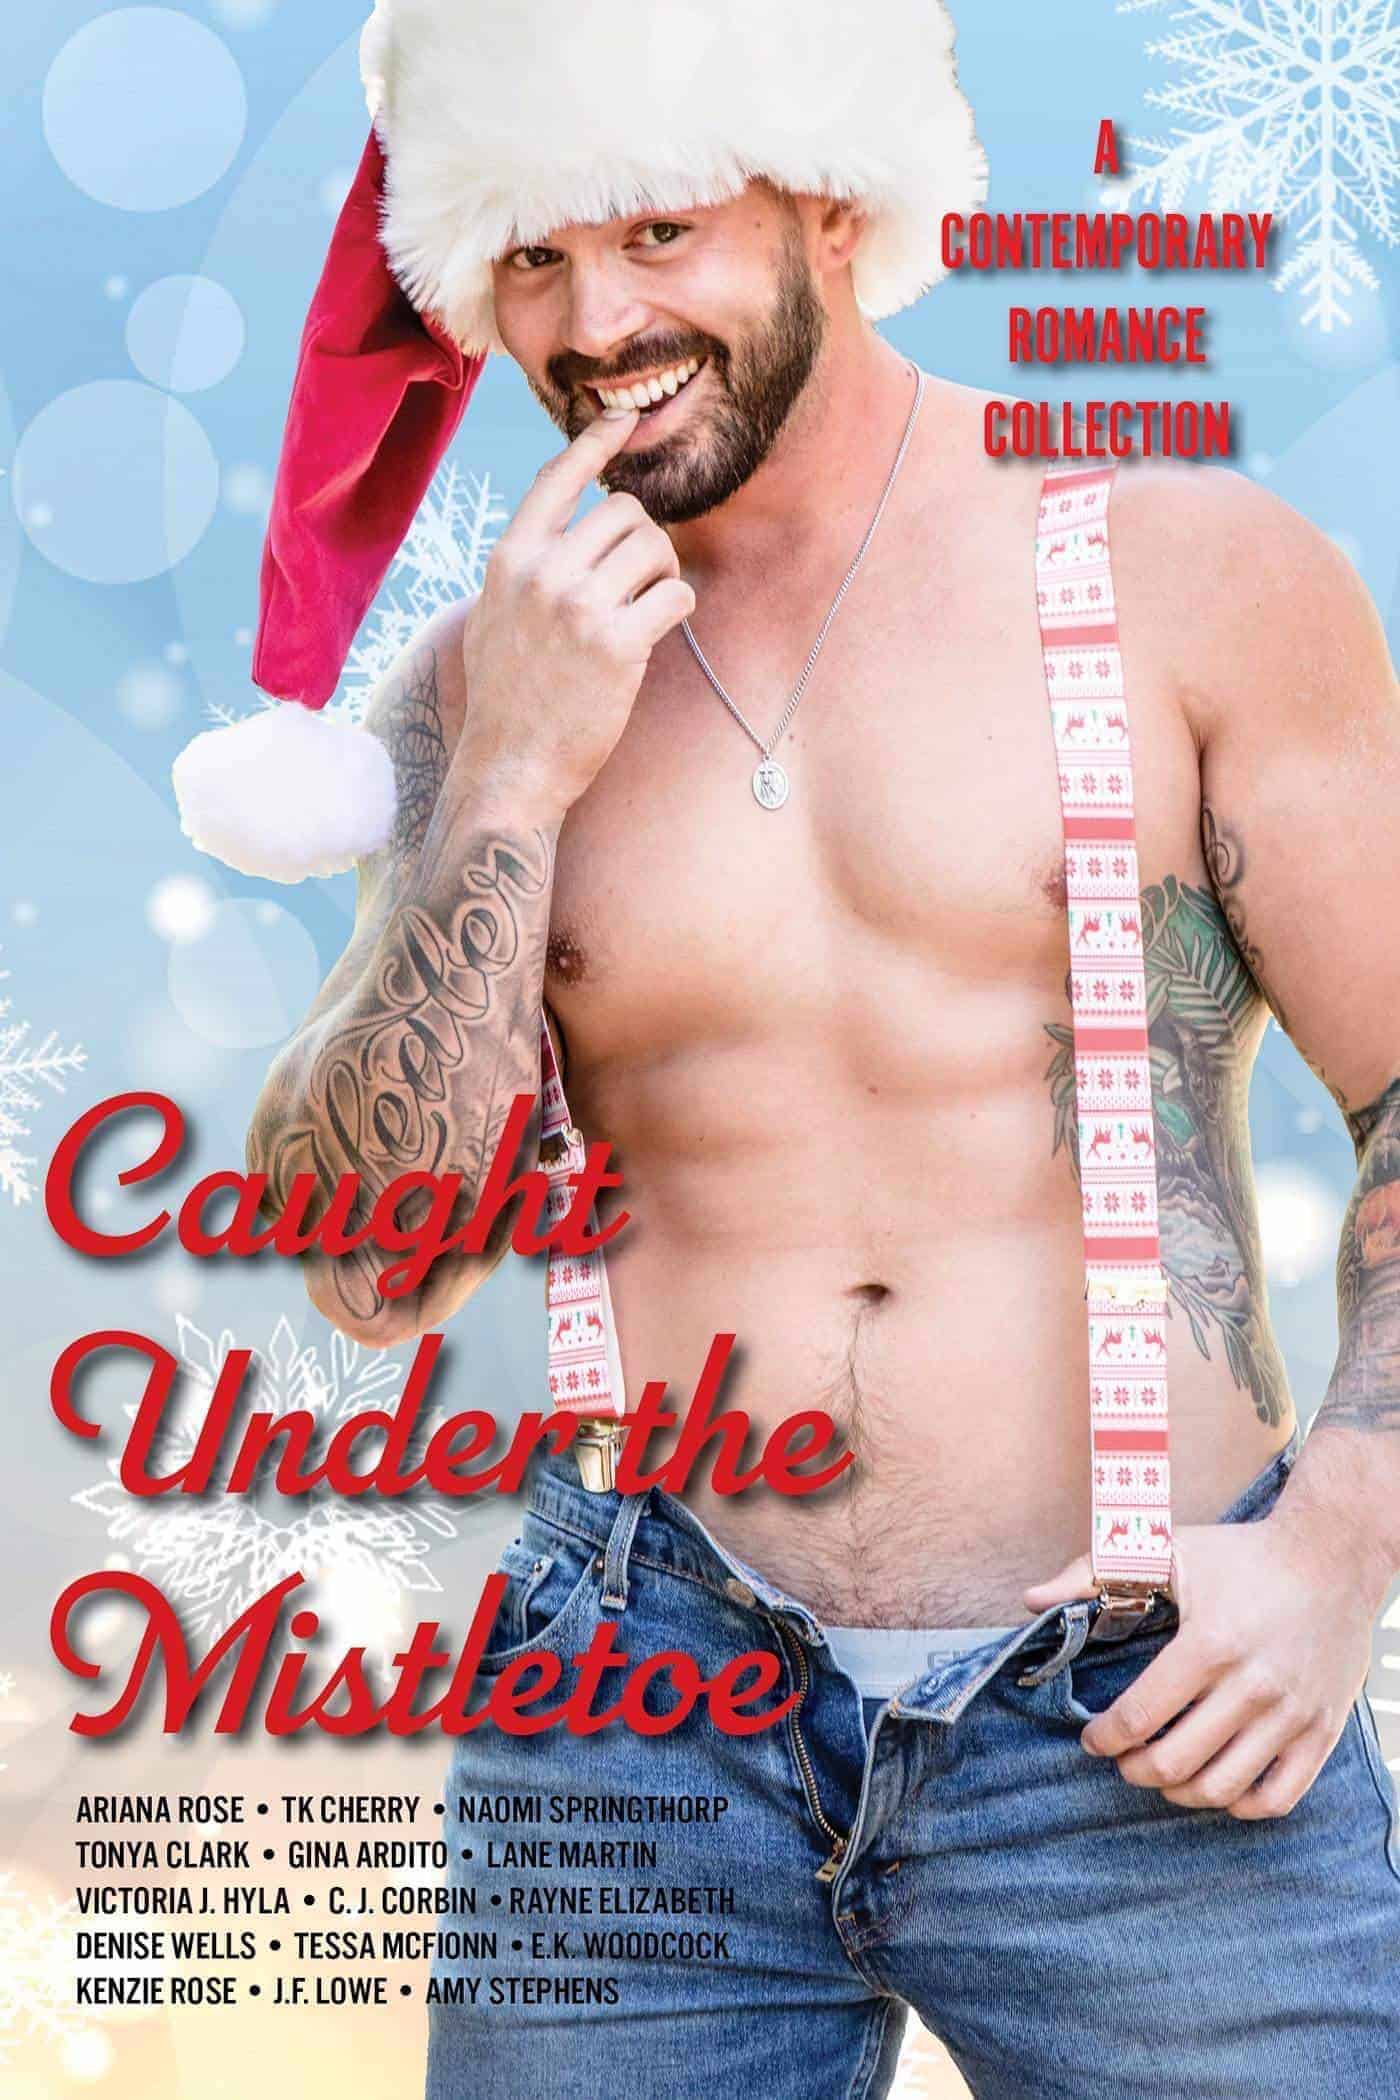 This Caught Under the Mistletoe is made with love by Victoria J. Hyla (Author)/Victorious Editing Services! Shop more unique gift ideas today with Spots Initiatives, the best way to support creators.